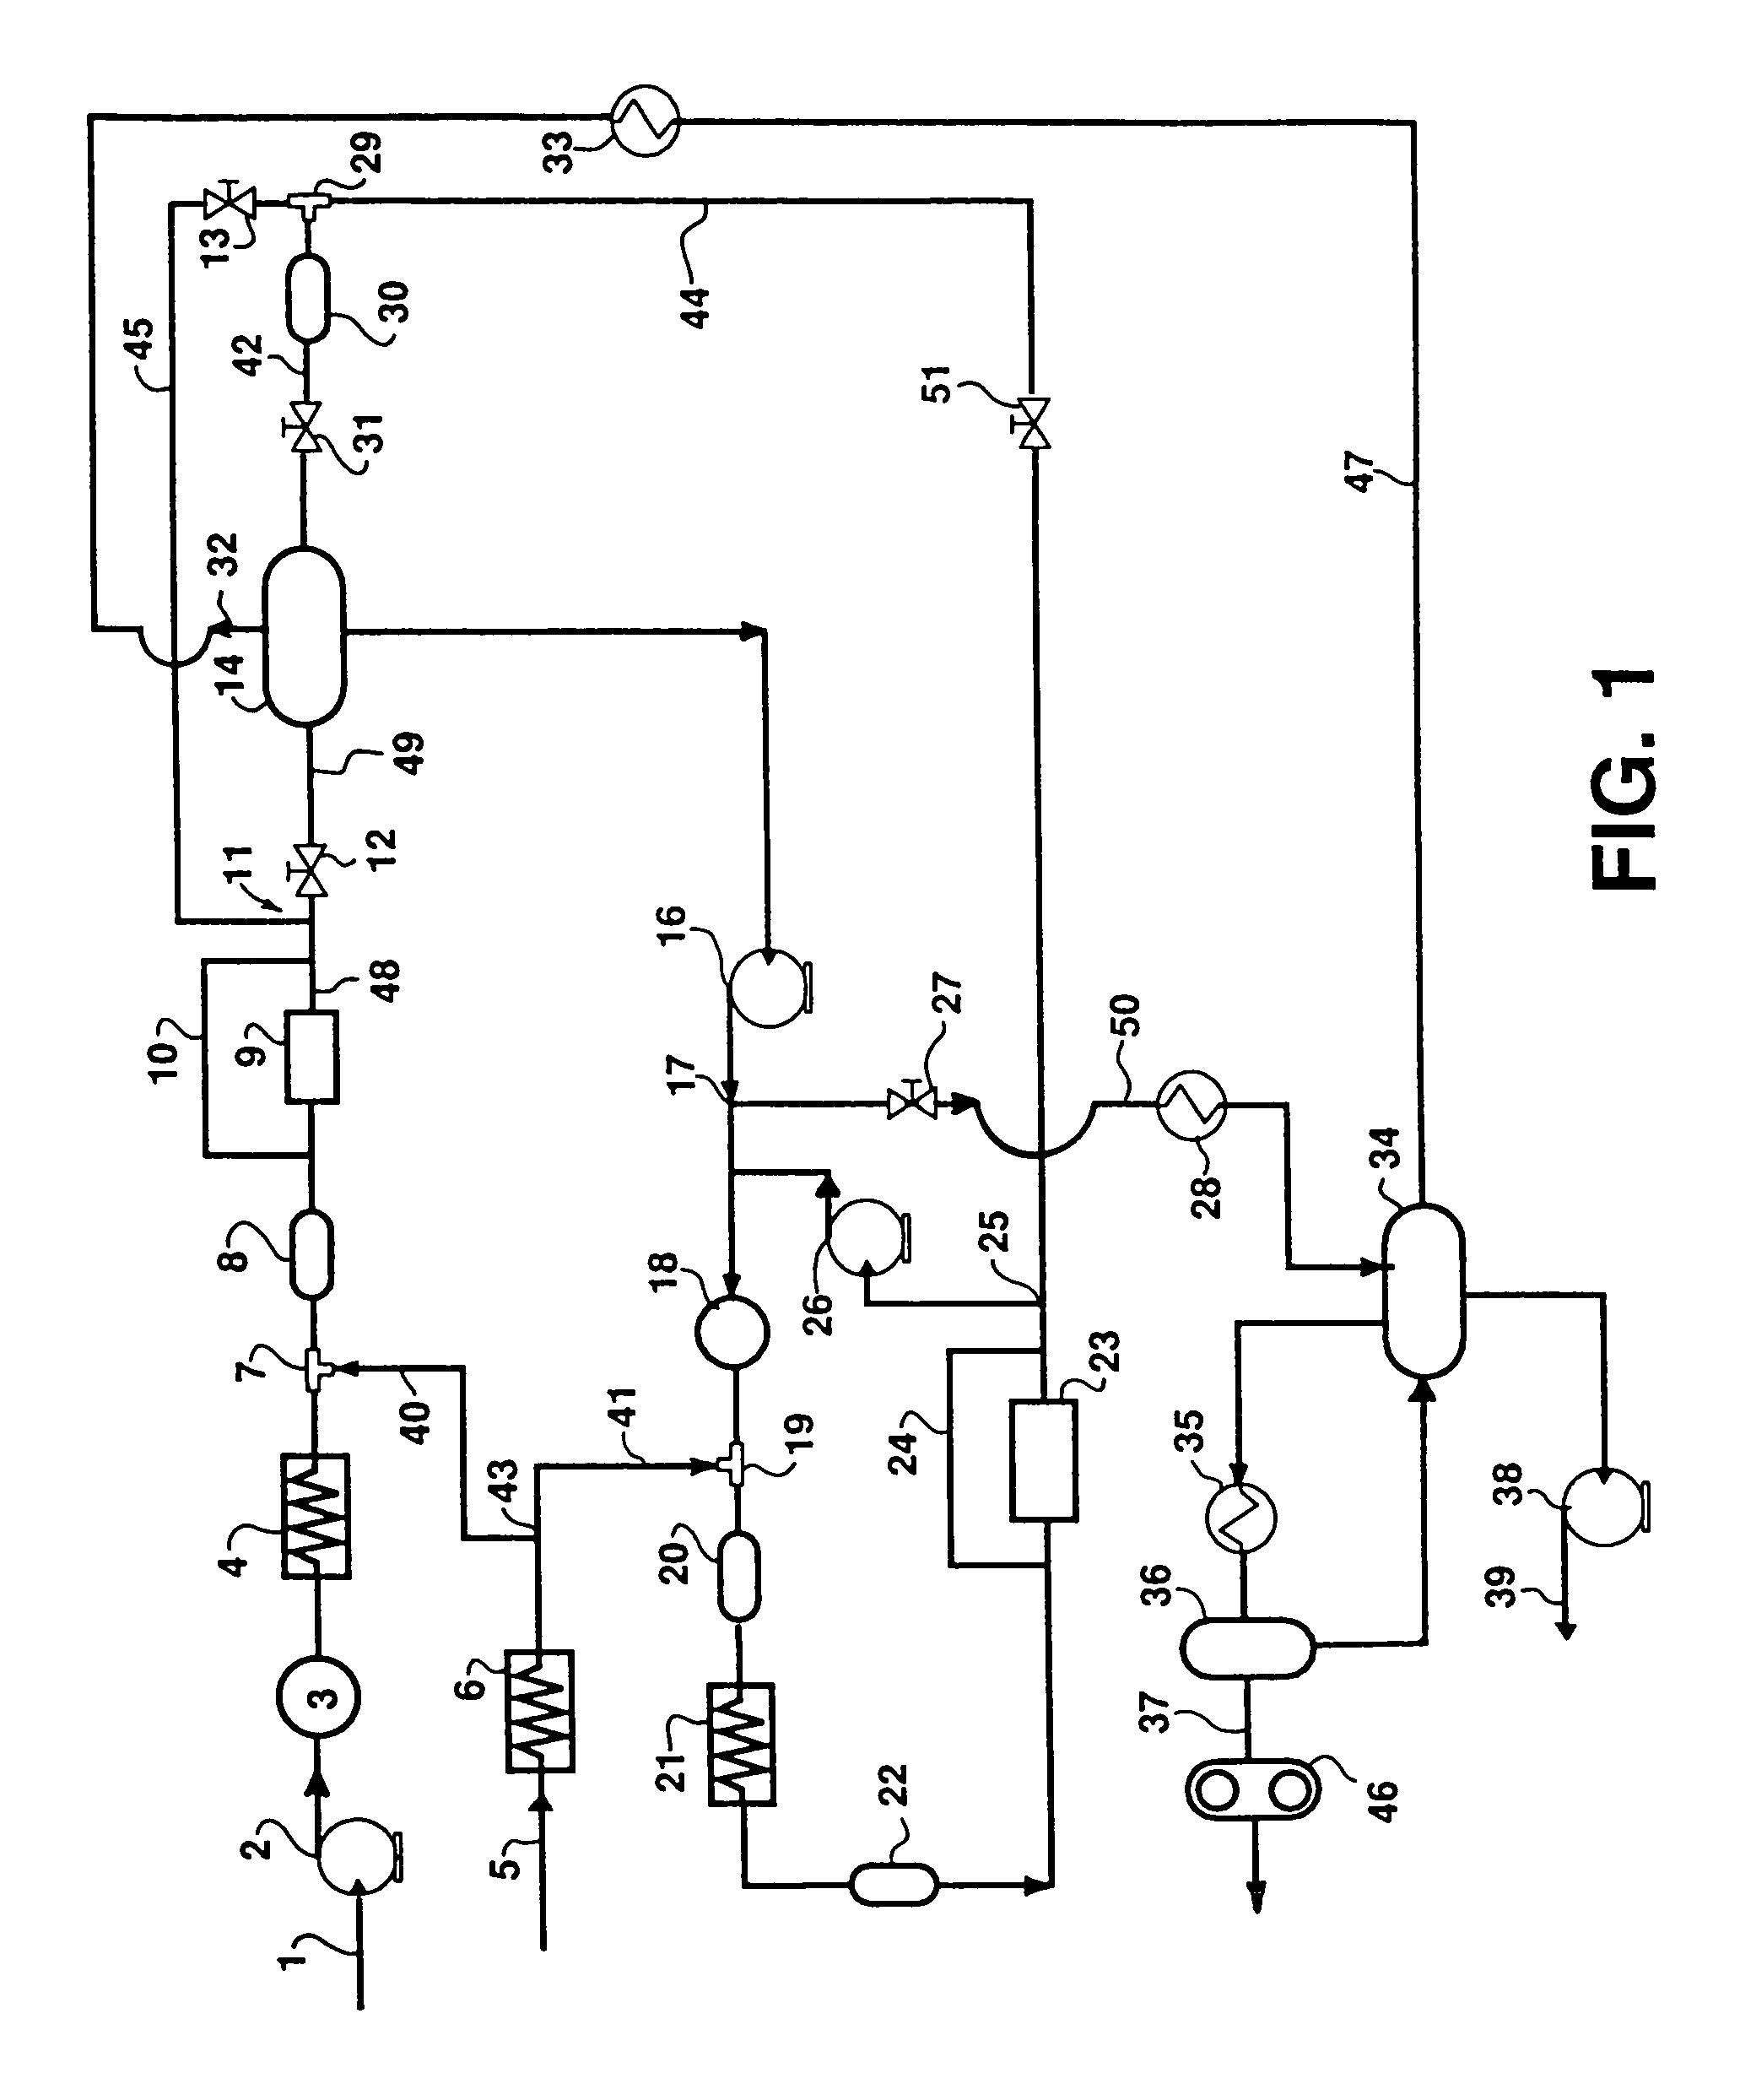 Process for treating crude oil using hydrogen in a special unit